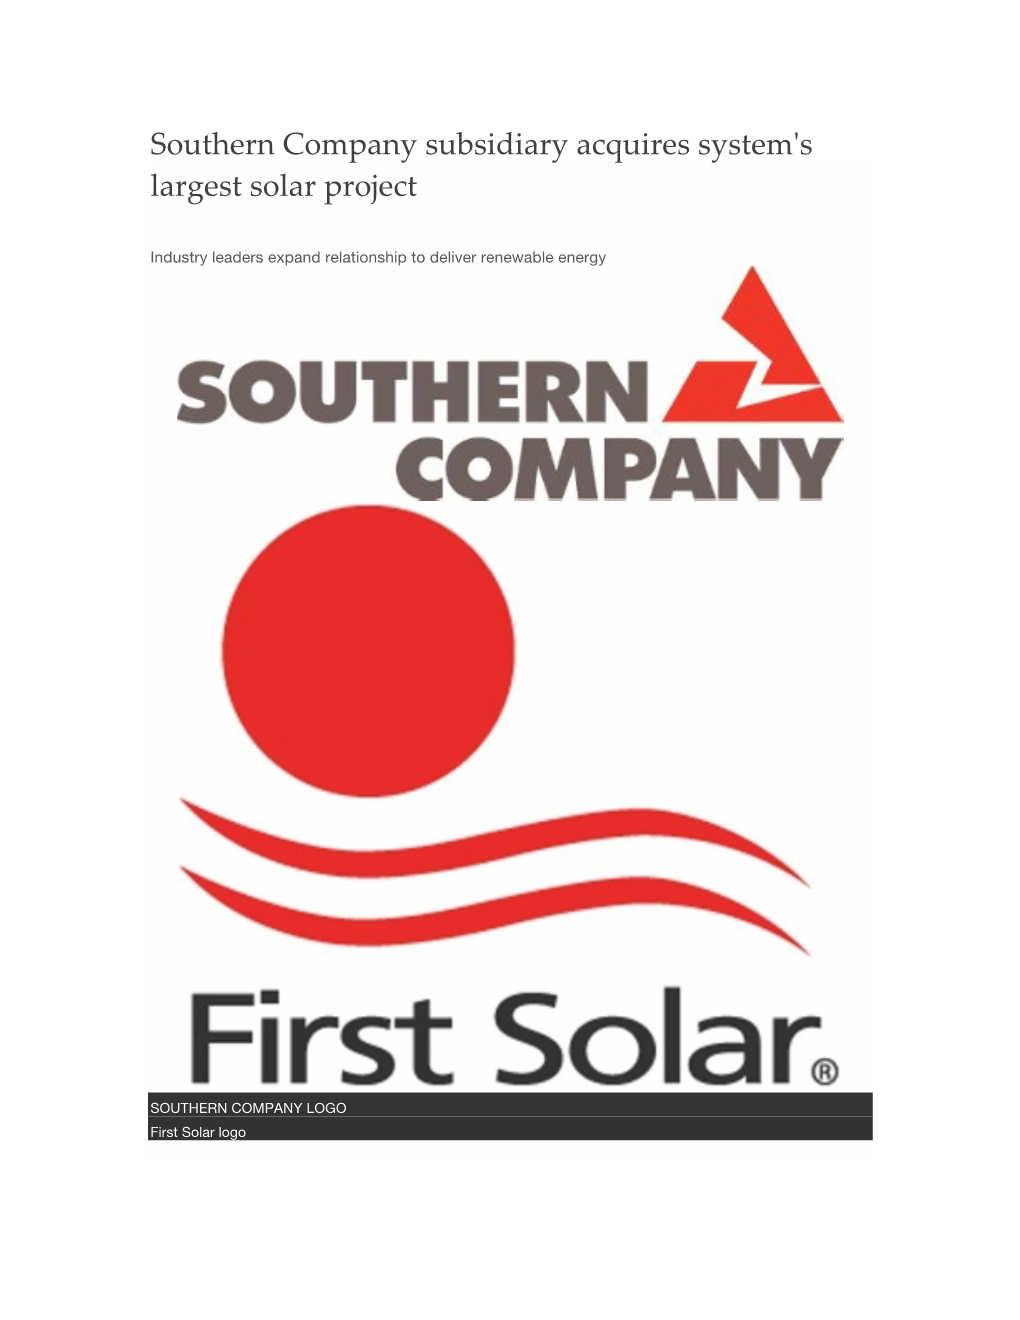 Southern Company Subsidiary Acquires System's Largest Solar Project